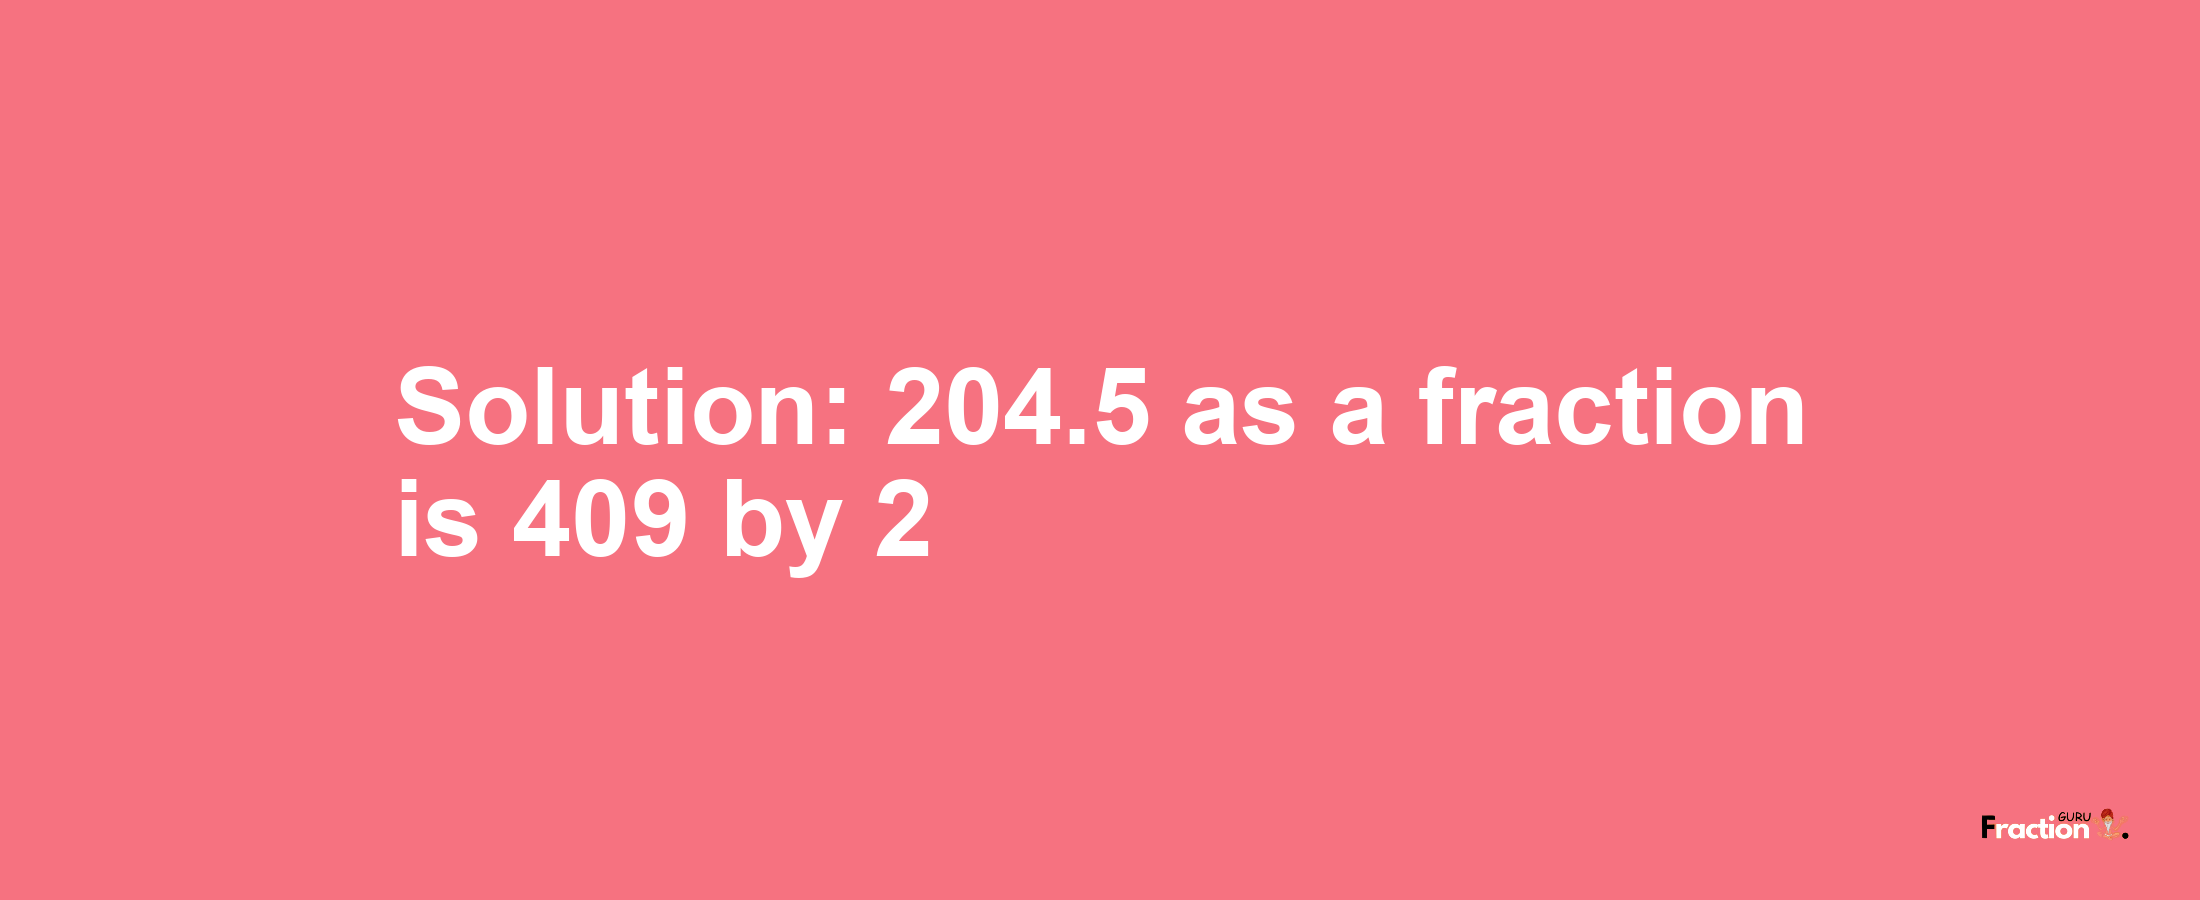 Solution:204.5 as a fraction is 409/2